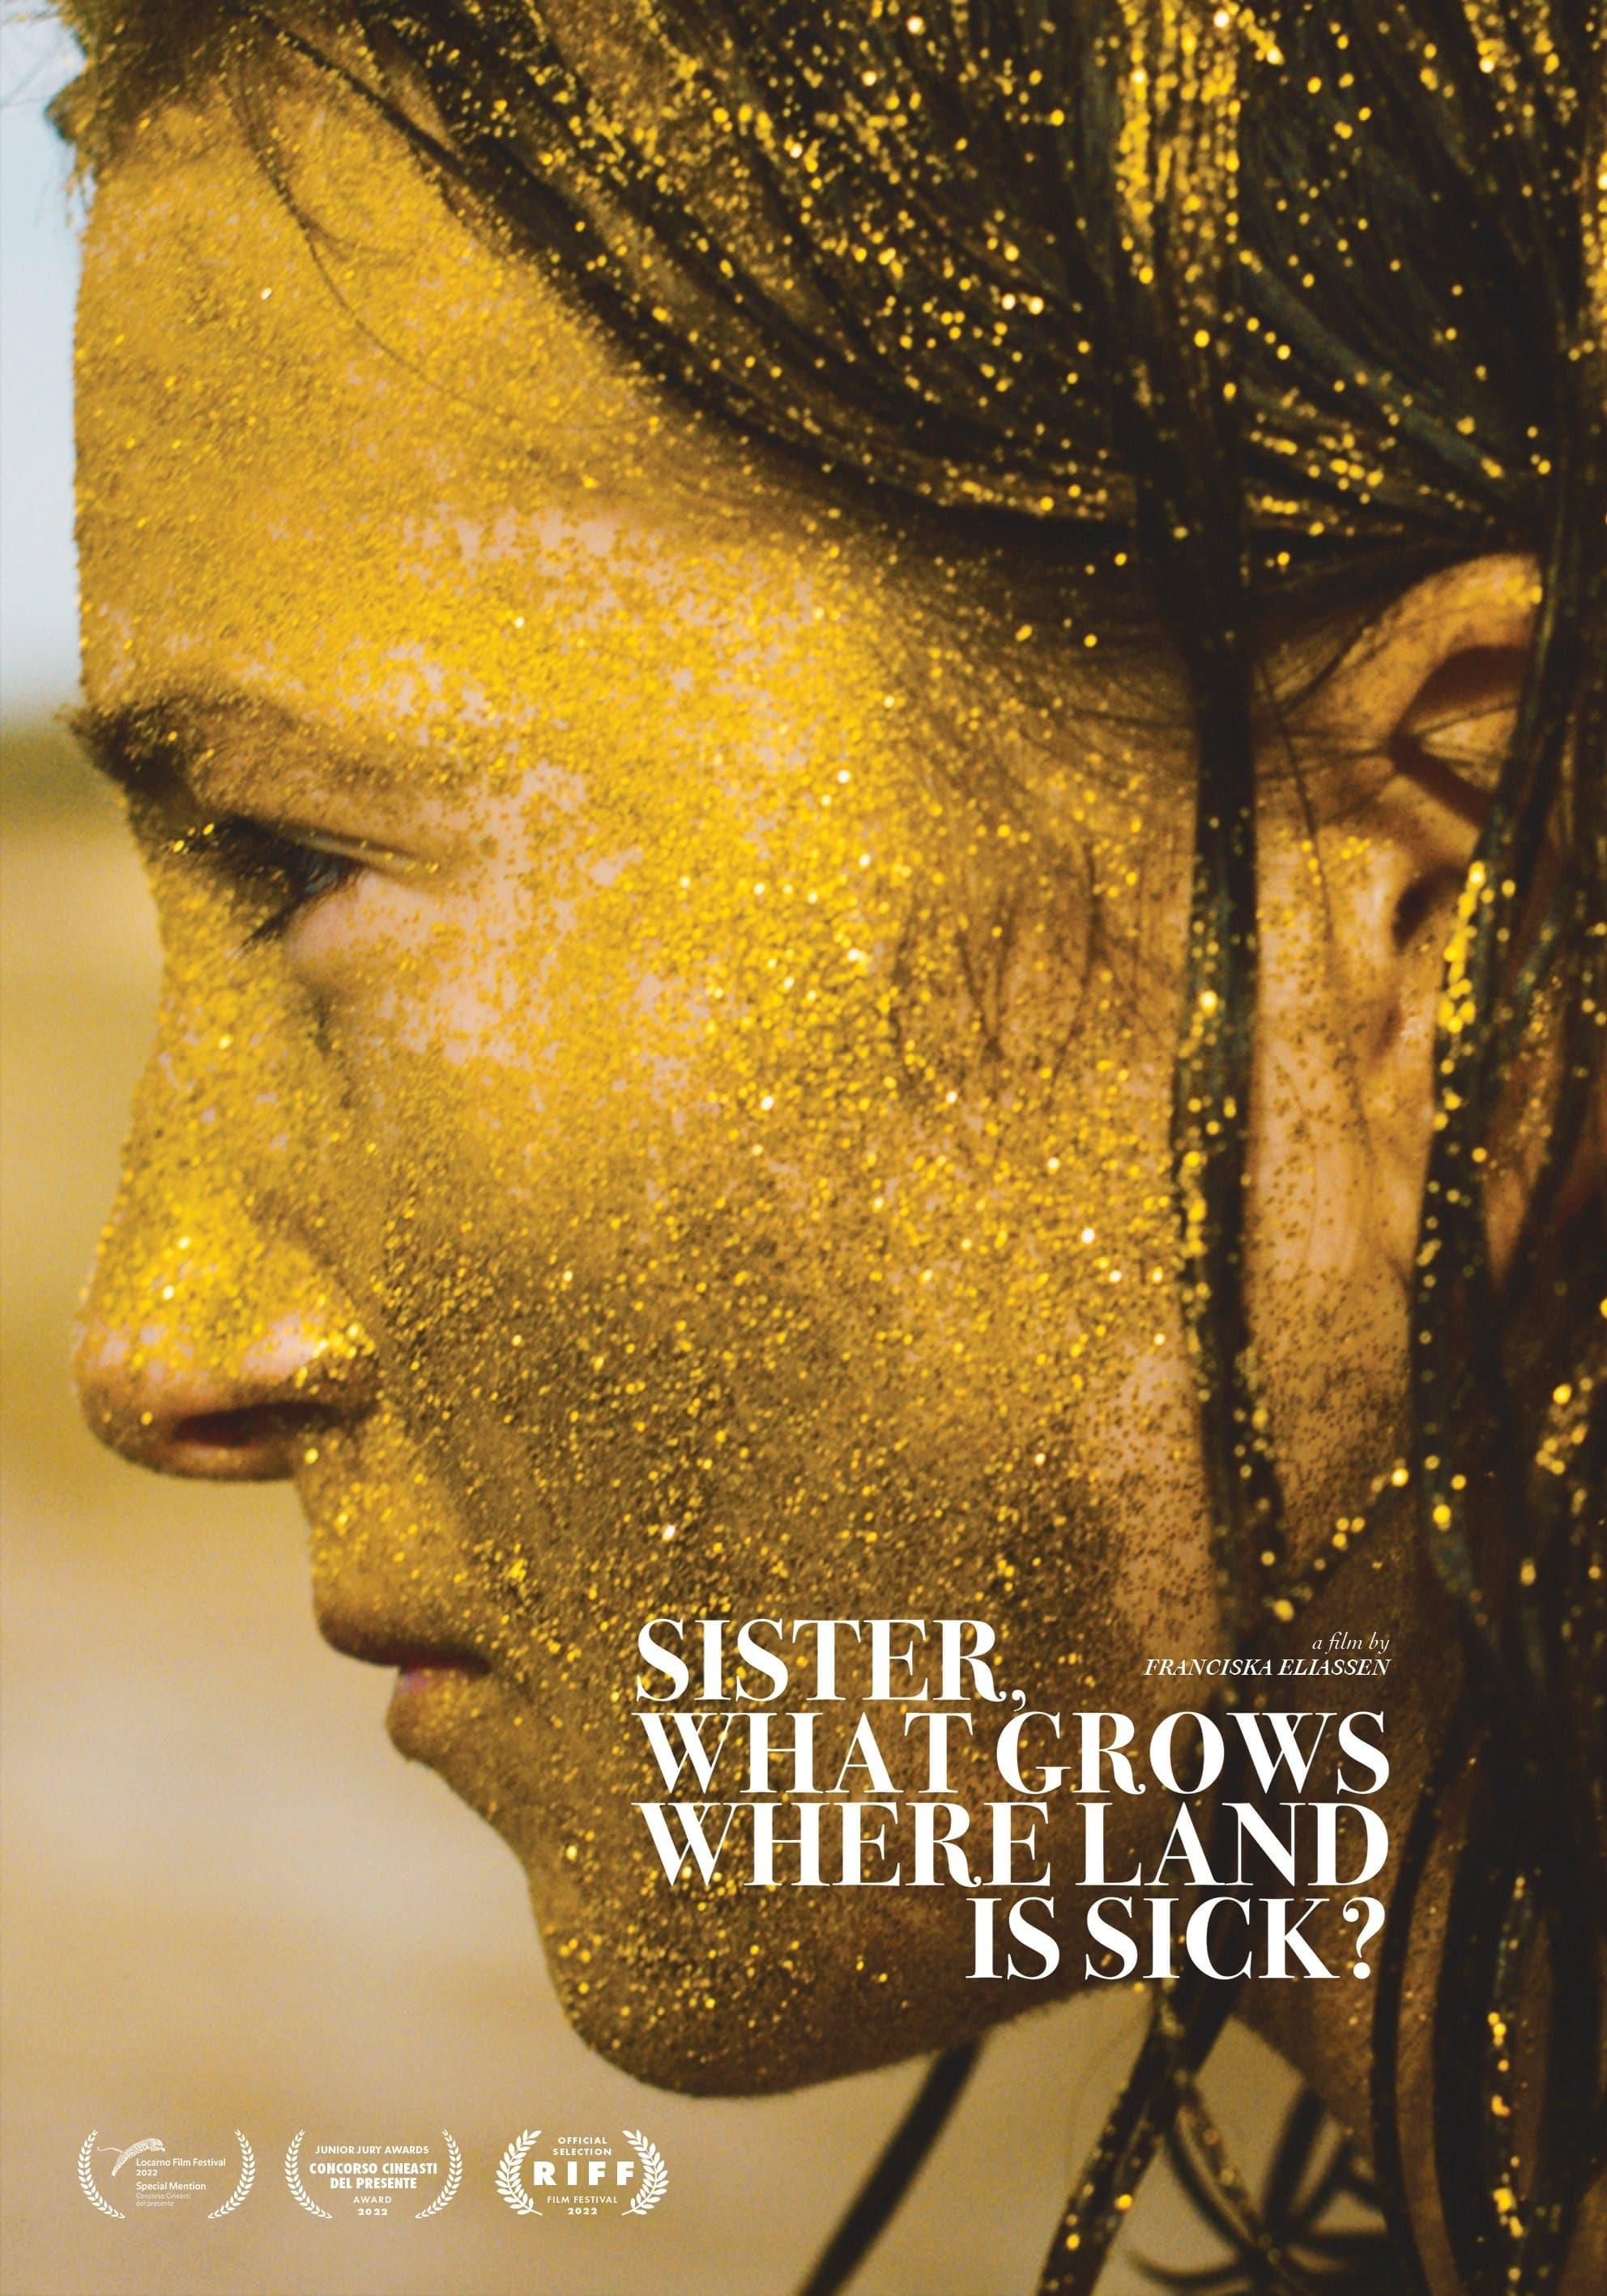 Sister, What Grows Where Land Is Sick? poster